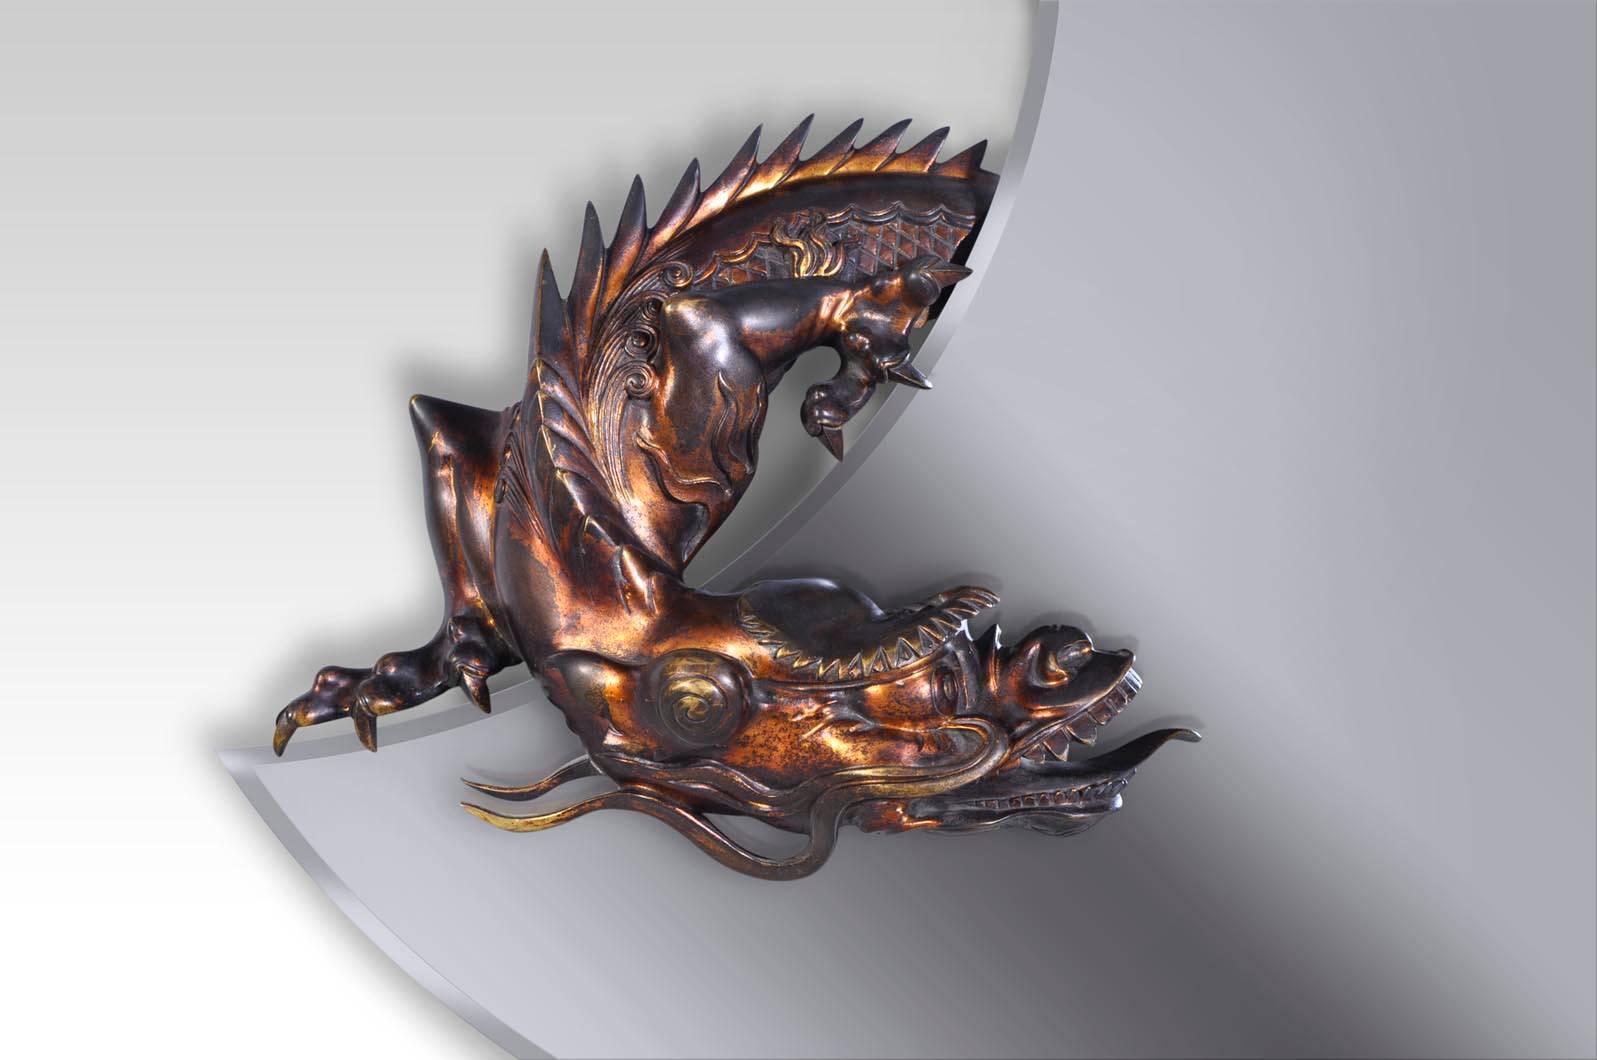 This late 19th century dragon mirror is attributed to Perret and Vibert from Maison des Bambous in Paris. The dragon is realized in bronze with beautiful red patina. This mirror is characteristic of the Japonism vogue during the last 30 years of the